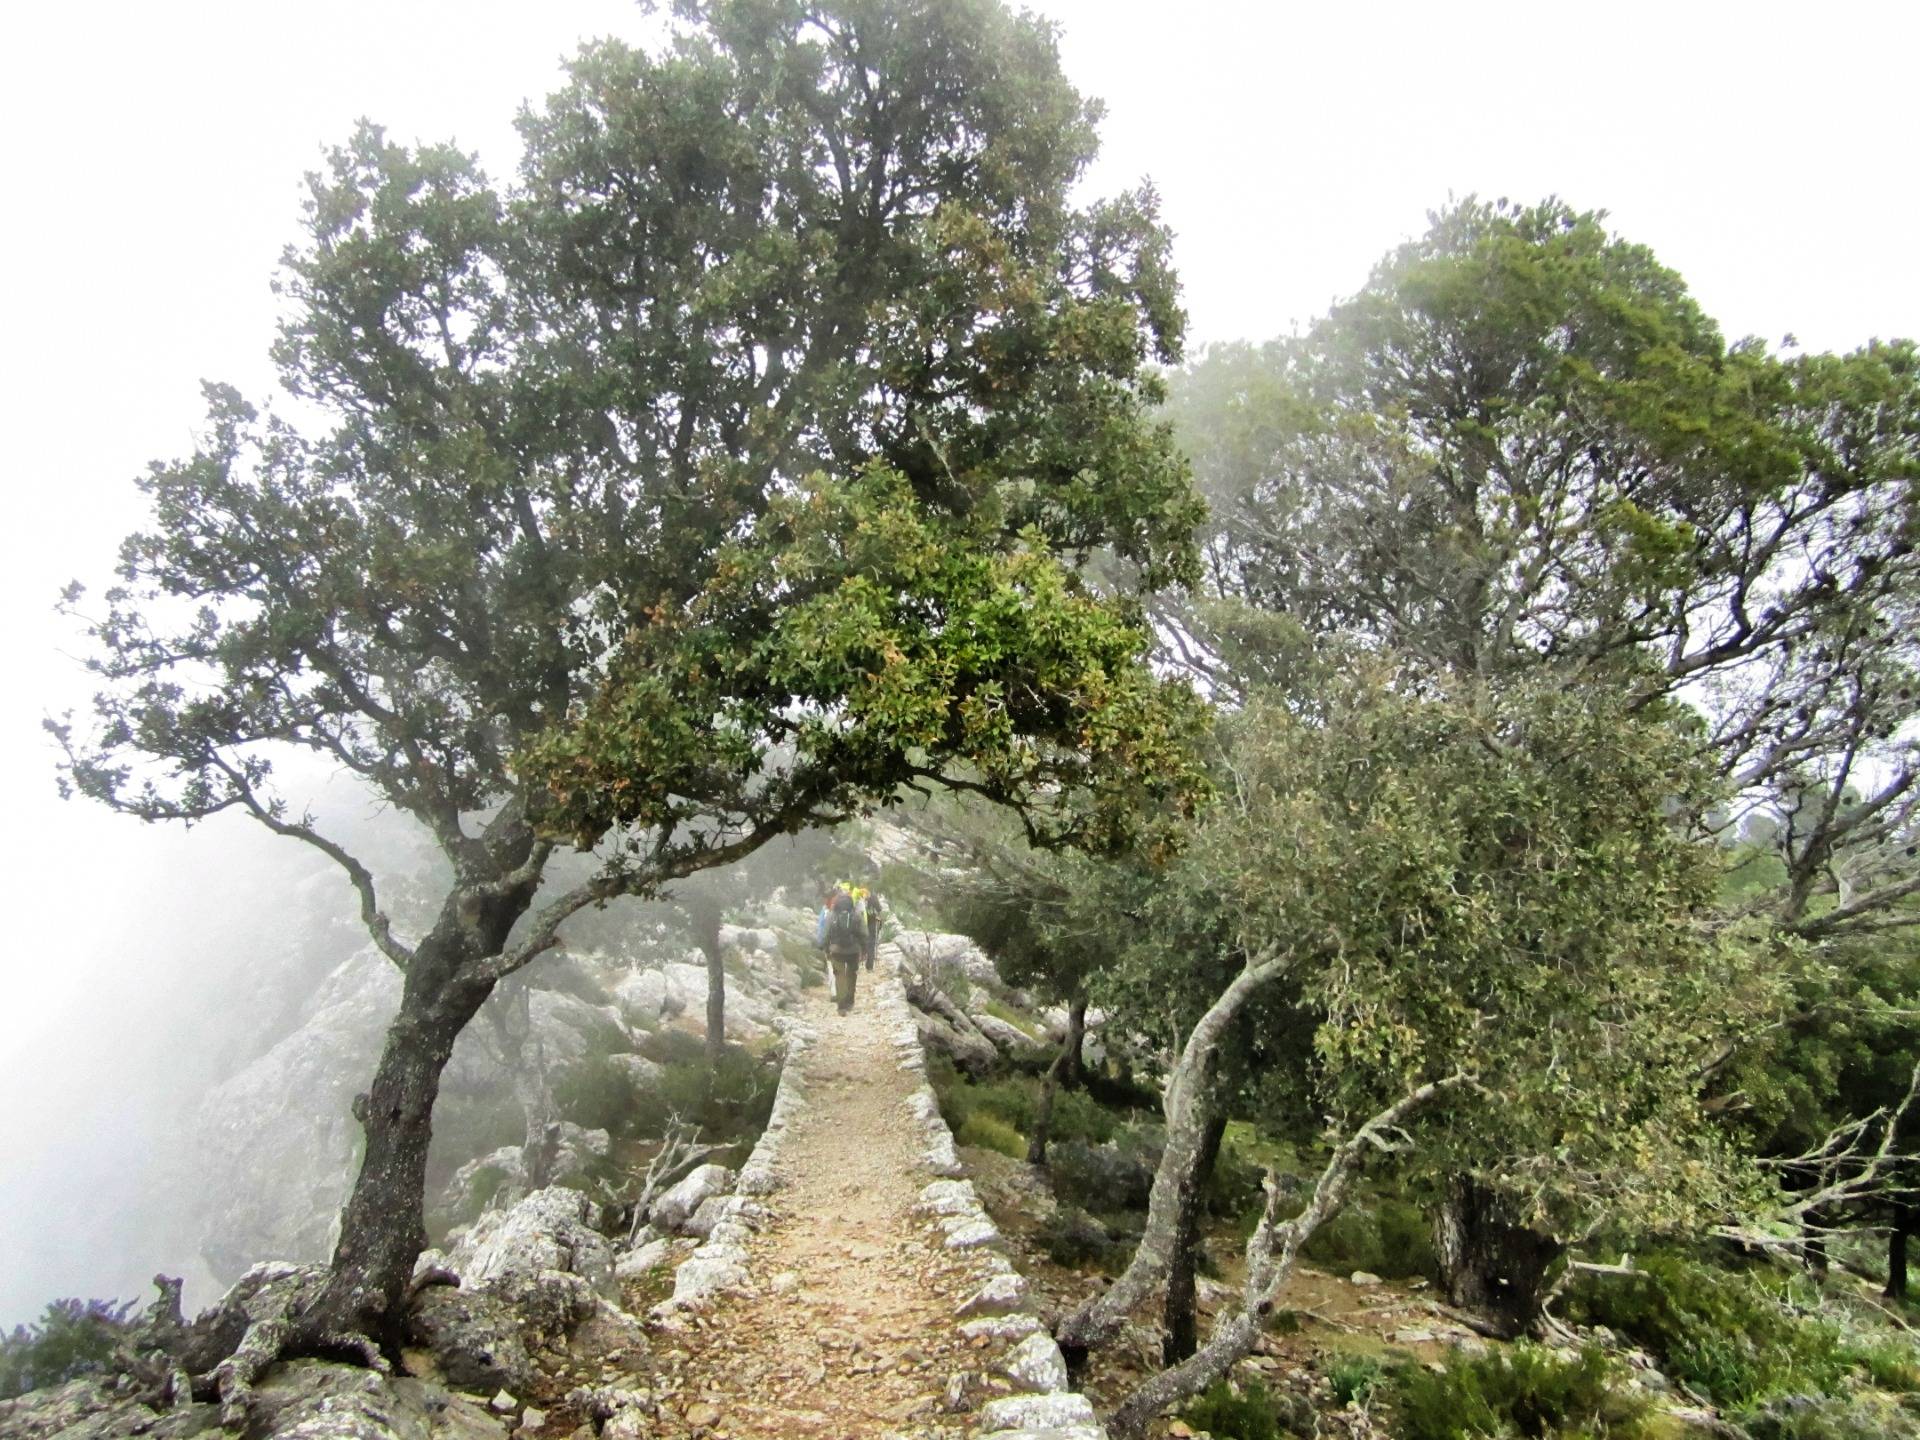 The bridle way of the Tramuntana